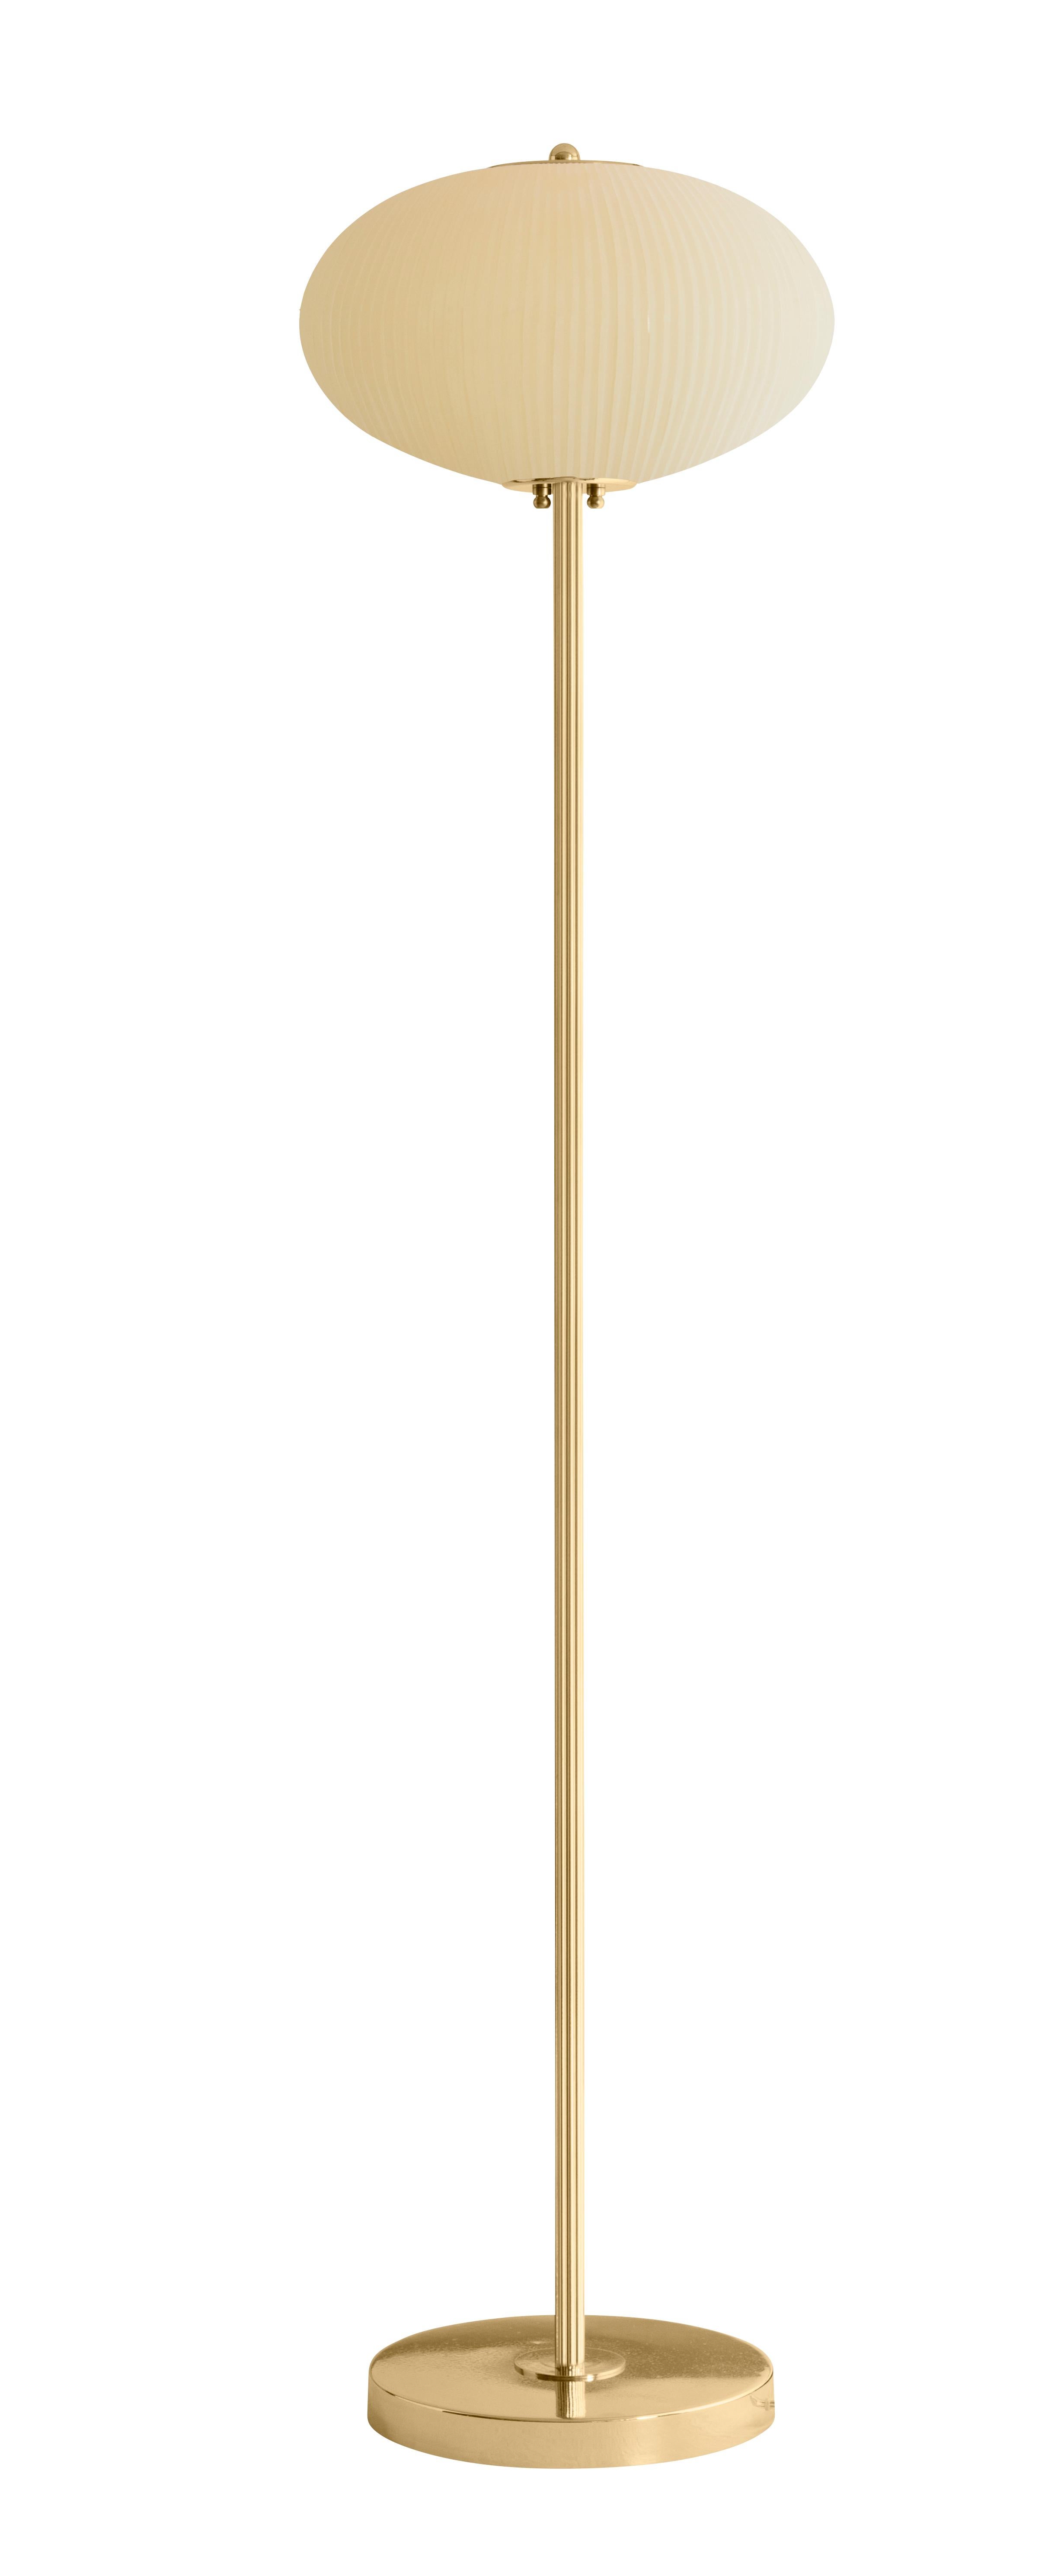 Floor lamp China 07 by Magic Circus Editions
Dimensions: H 150 x W 32 x D 32 cm, also available in H 140, 160
Materials: Brass, mouth blown glass sculpted with a diamond saw
Colour: mustard 

Available finishes: Brass, nickel
Available colours: